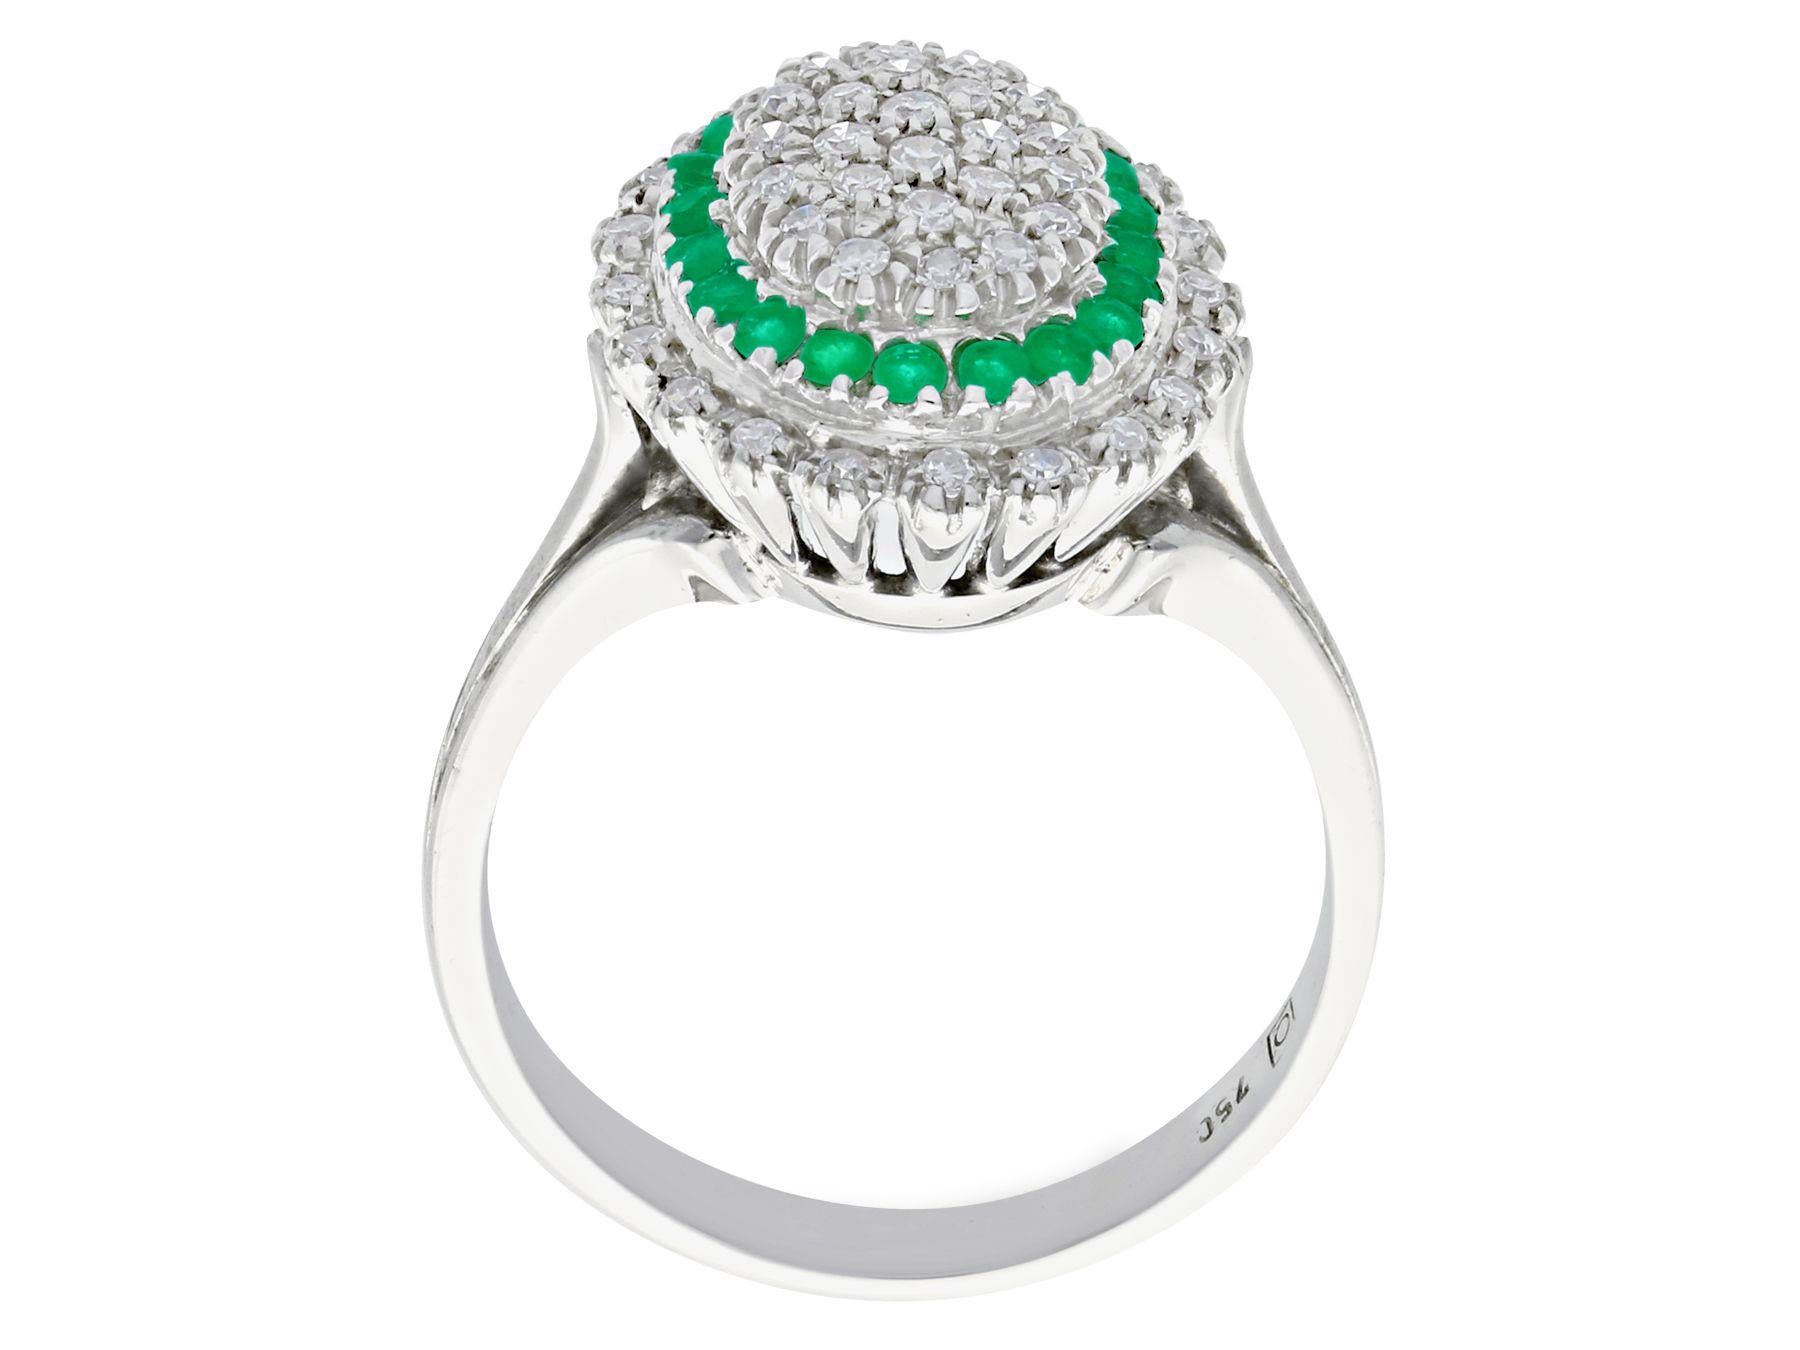 Women's 1990s Vintage Diamond and Emerald White Gold Cocktail Ring